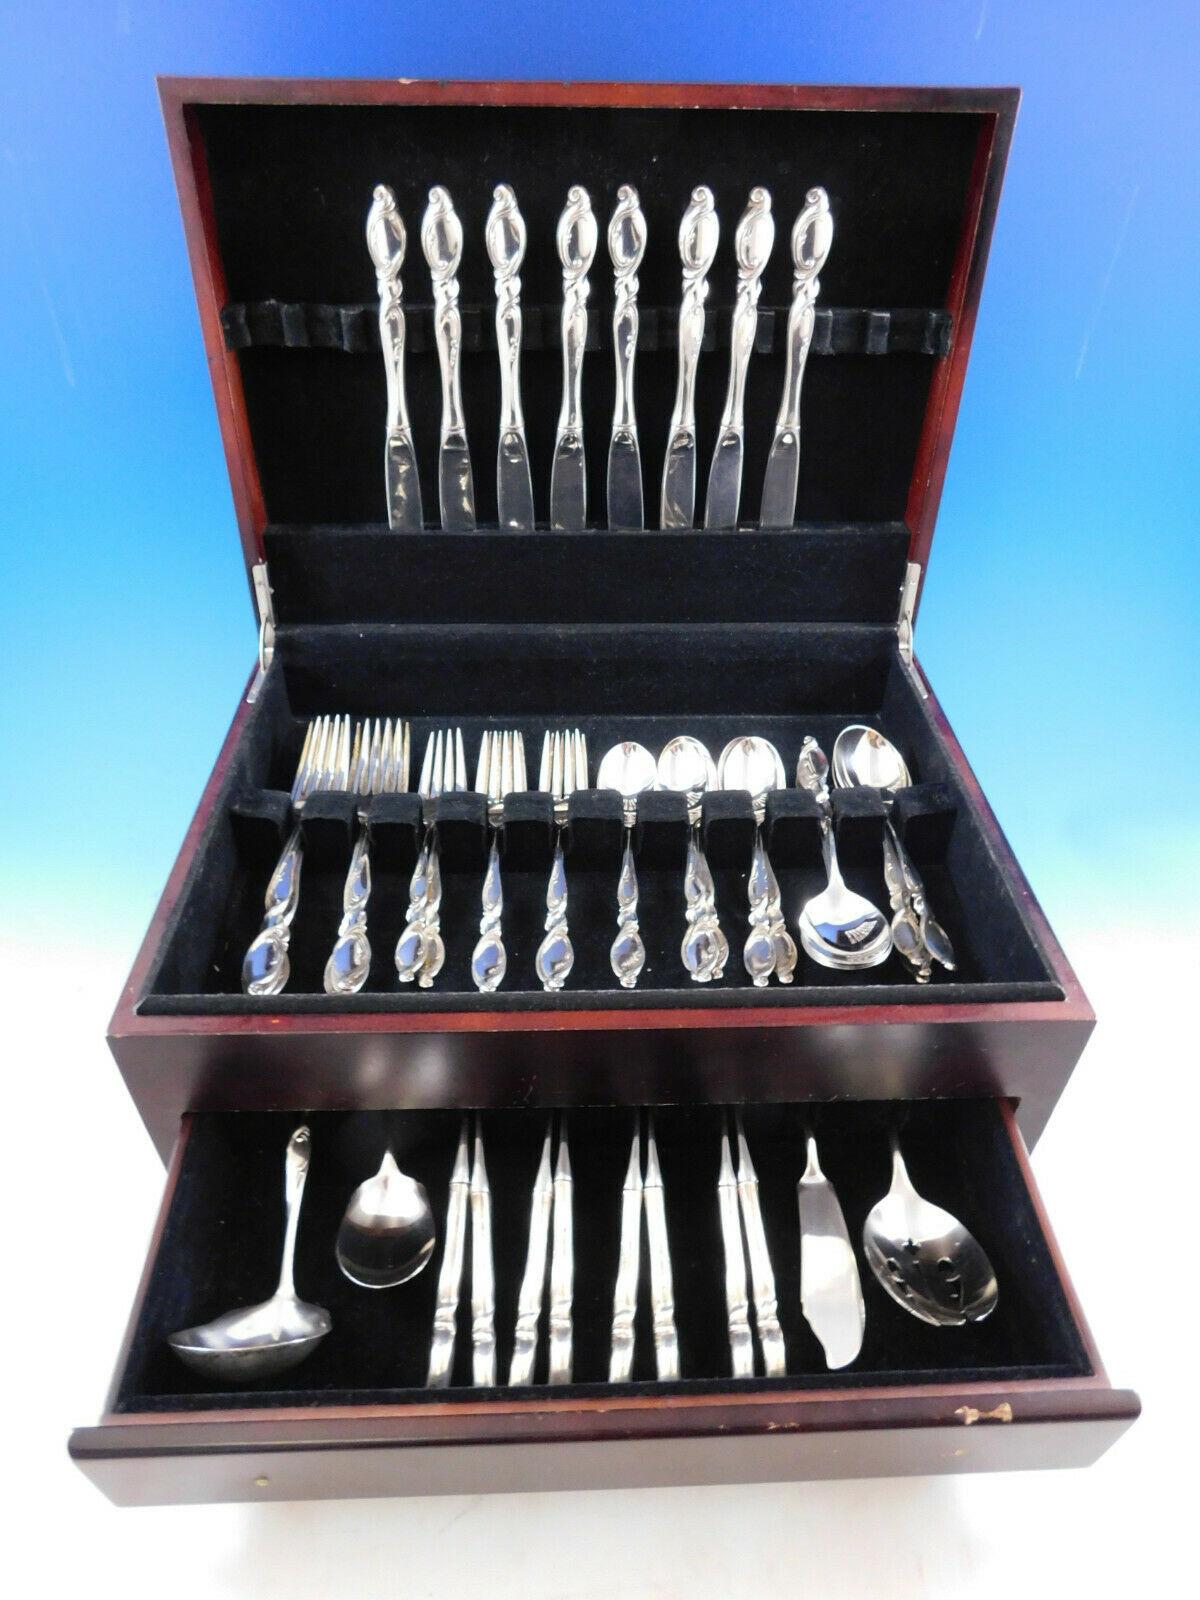 Silver Swirl by Wallace c1955 sterling silver Flatware set - 52 pieces. This set includes:


8 Knives, 9